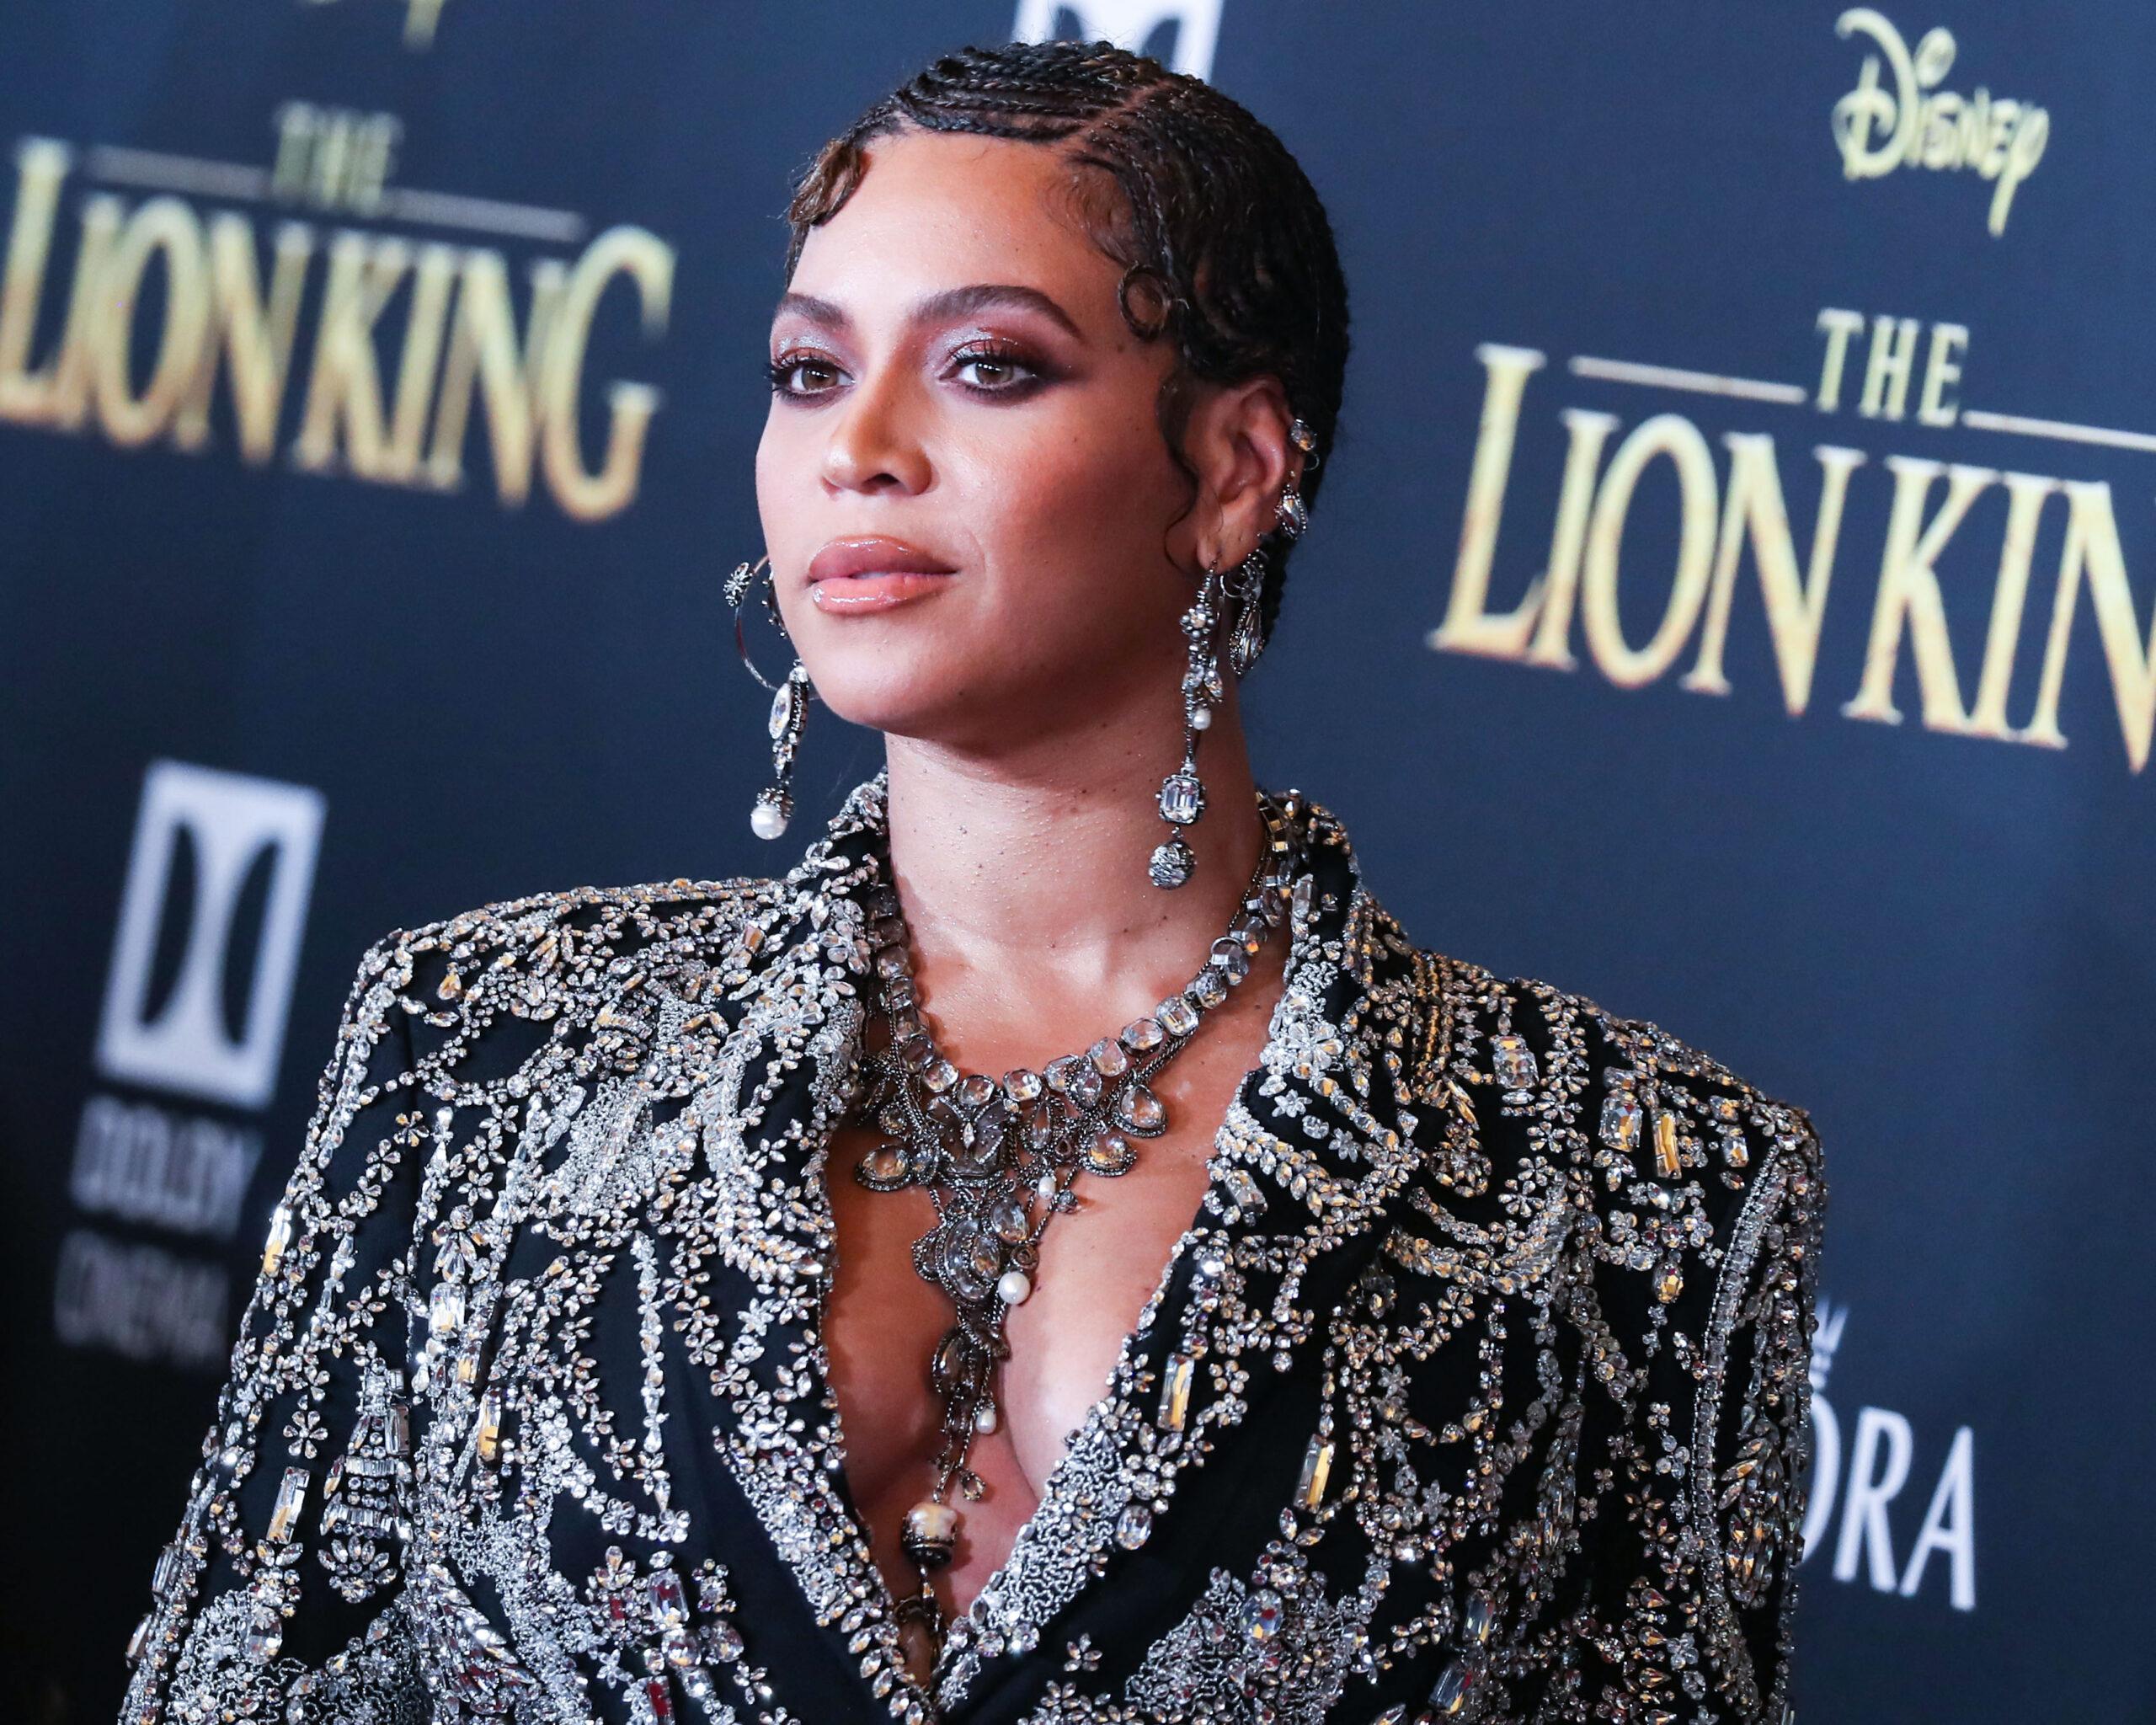 Beyonce Knowles Carter wearing an outfit by Alexander McQueen and Lorraine Schwartz jewelry arrives at the World Premiere Of Disney's 'The Lion King'